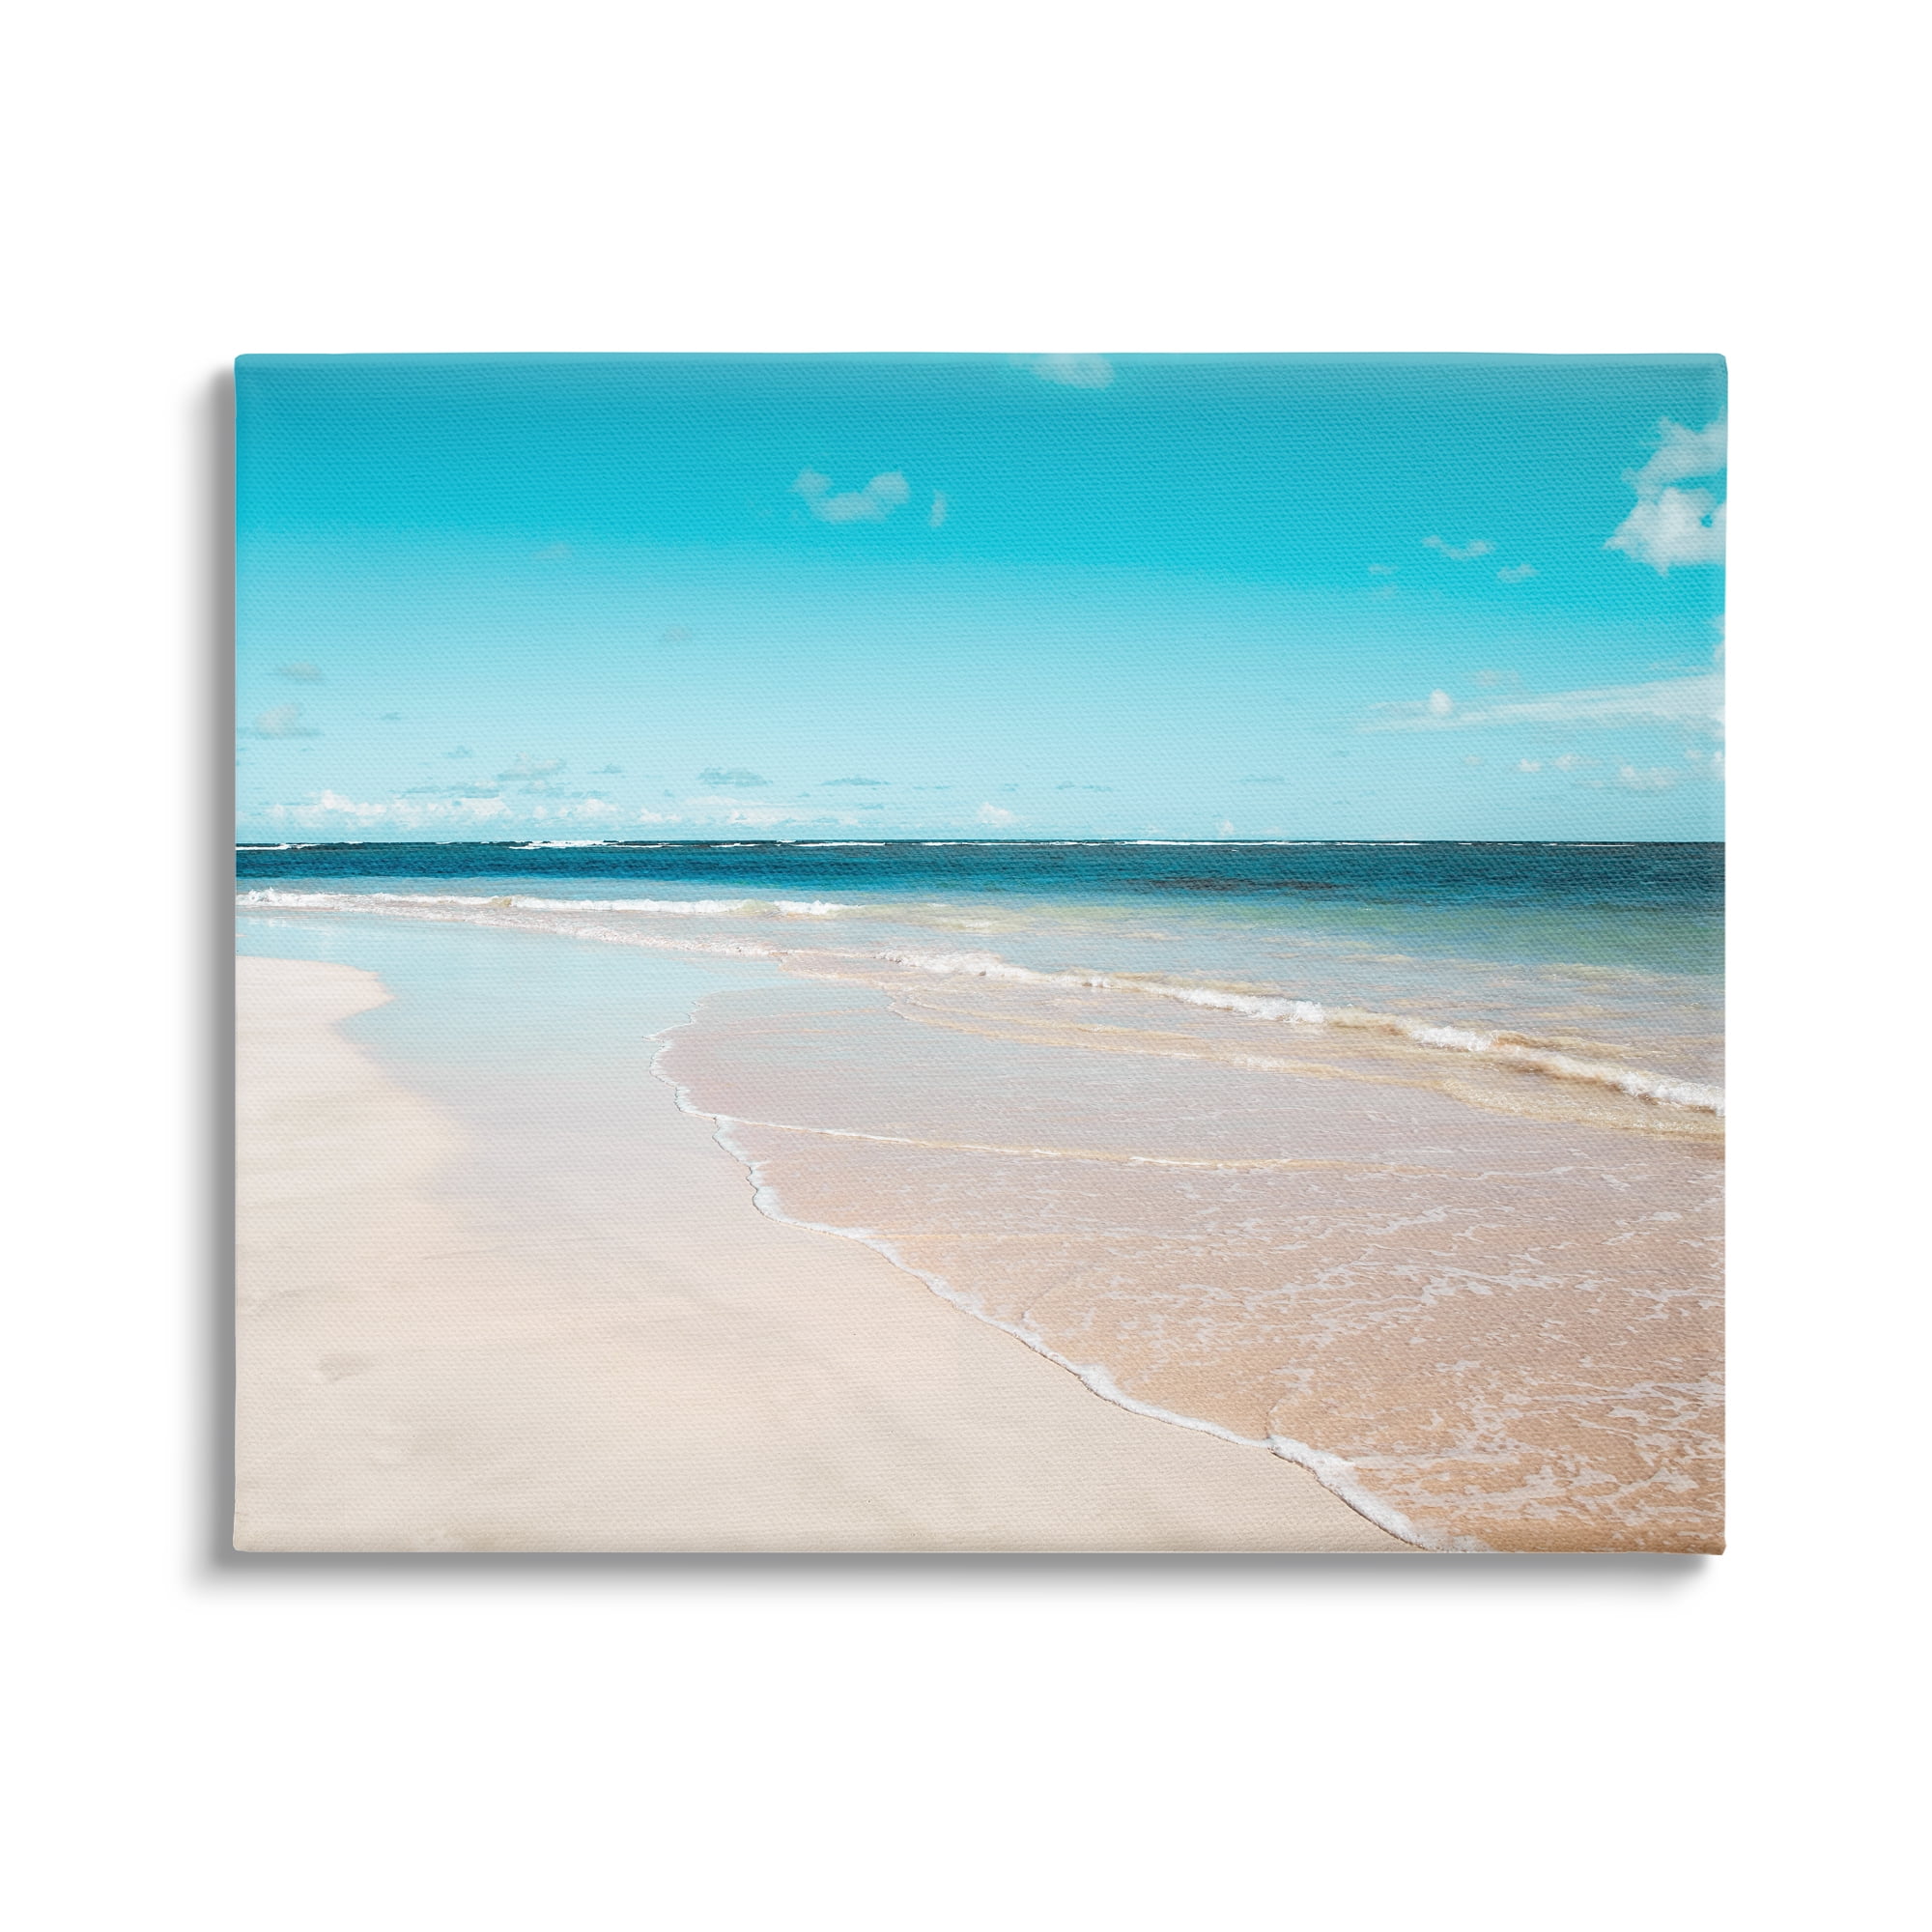  Tropical Paradise Poster Amazing Beach and Palm Tree